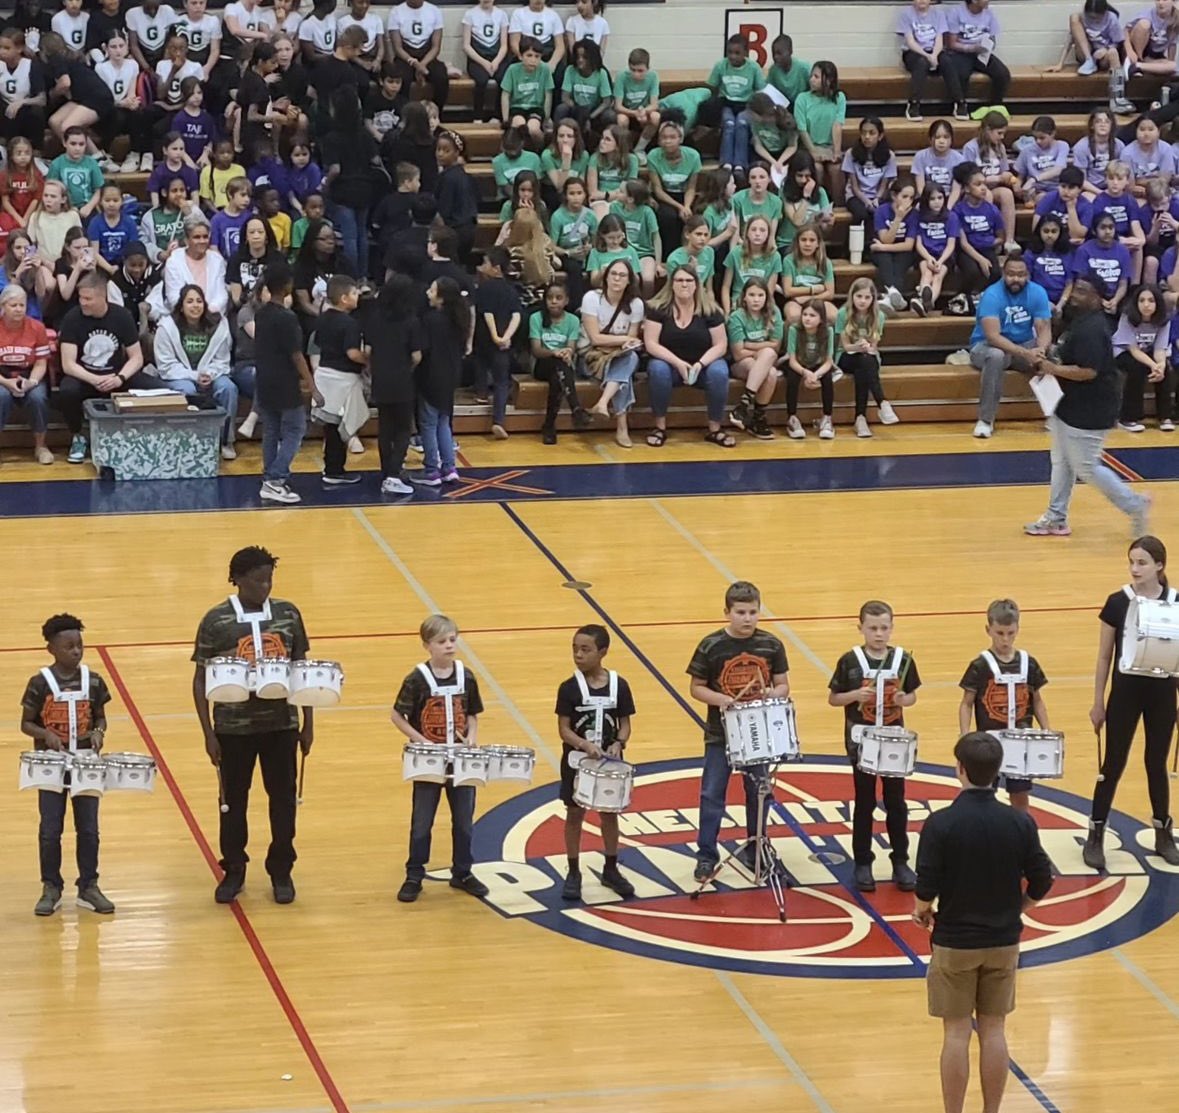 What an incredible showcase! Greenwood represented STRONG! If any parents got pictures, please send to Mr. Stein at rtstein@henrico.k12.va.us or leave in comment below. We are hoping to use your photos for our hallways and yearbook!